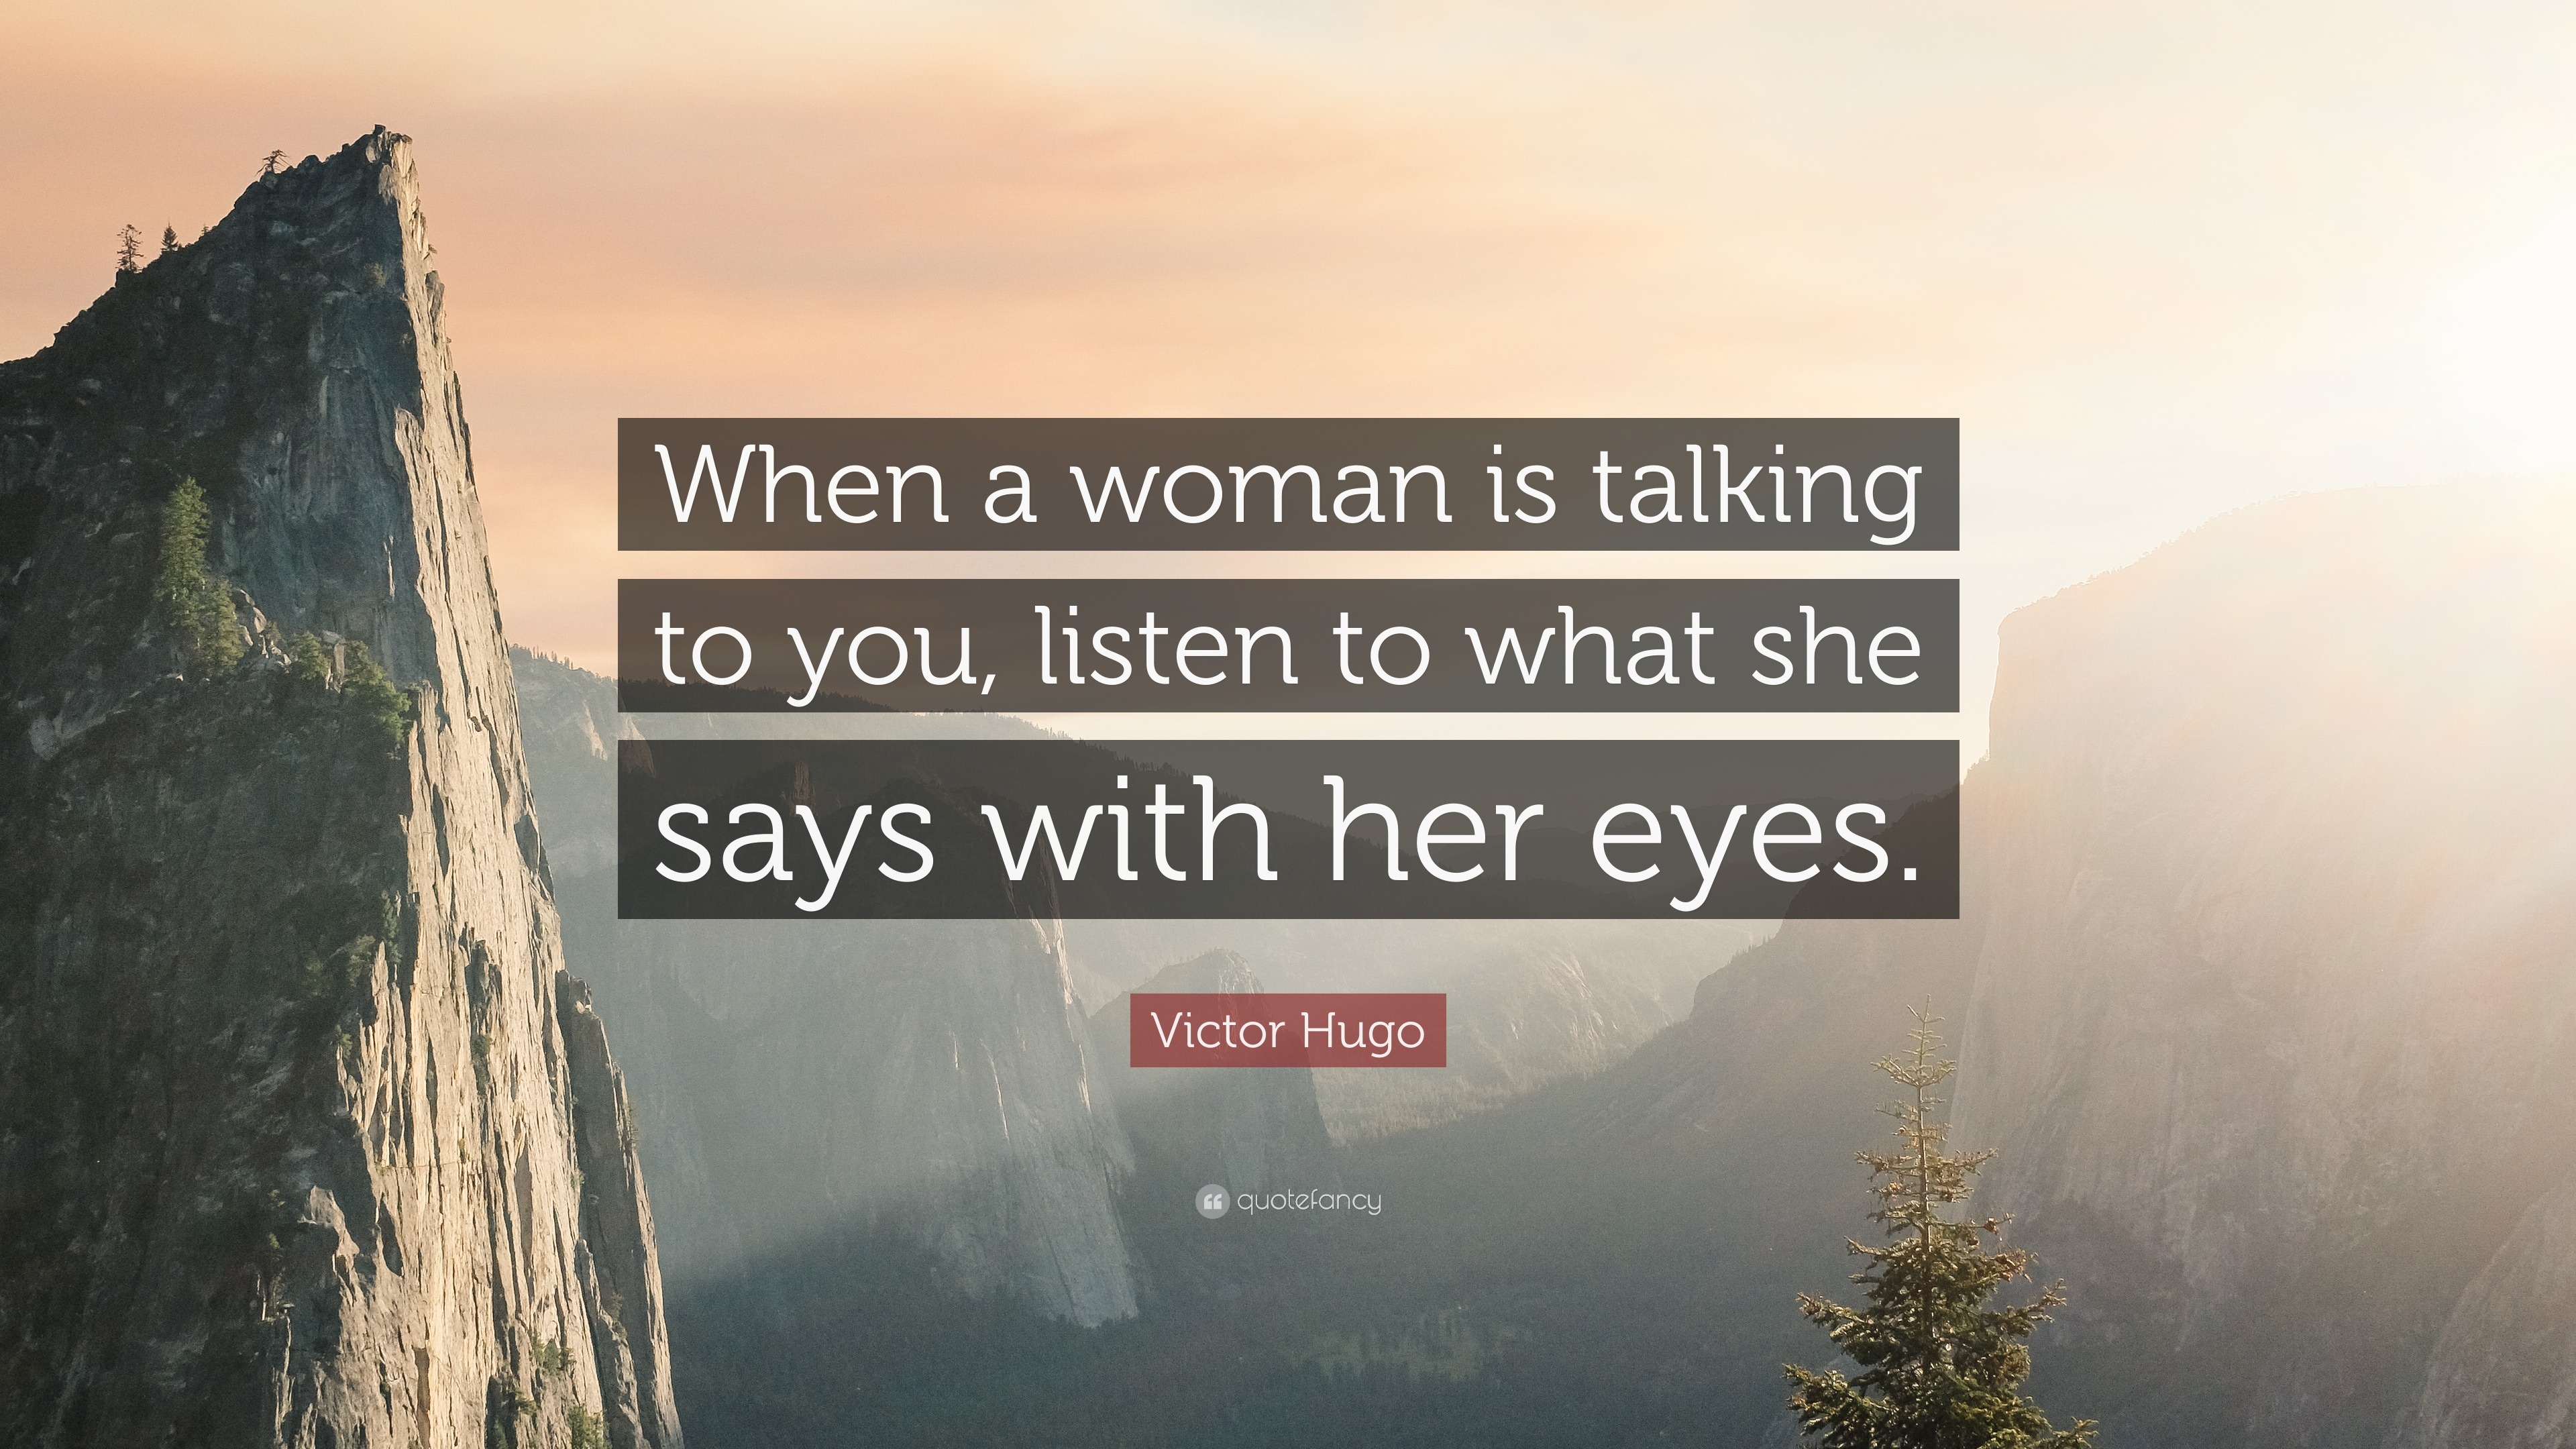 Victor Hugo Quote: “When a woman is talking to you, listen to what she ...